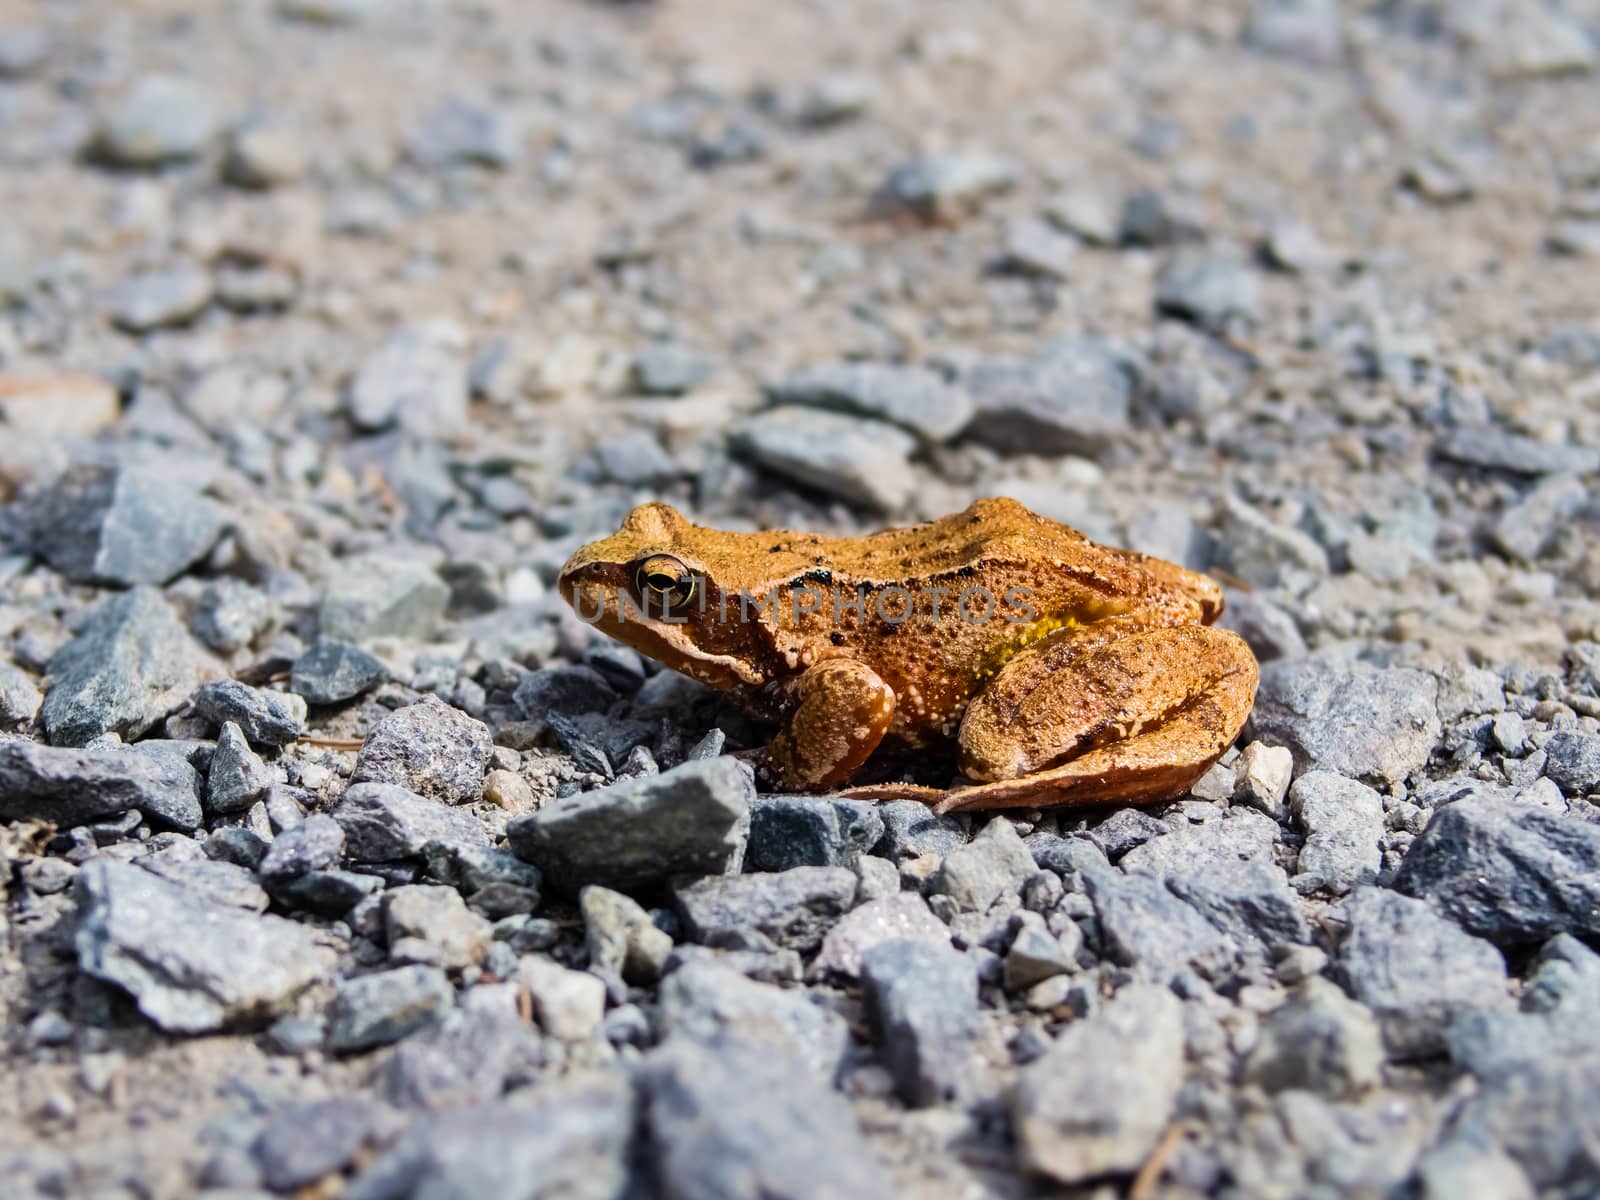 Orange brown common toad, rana temporaria, calmly sitting on the rocky road